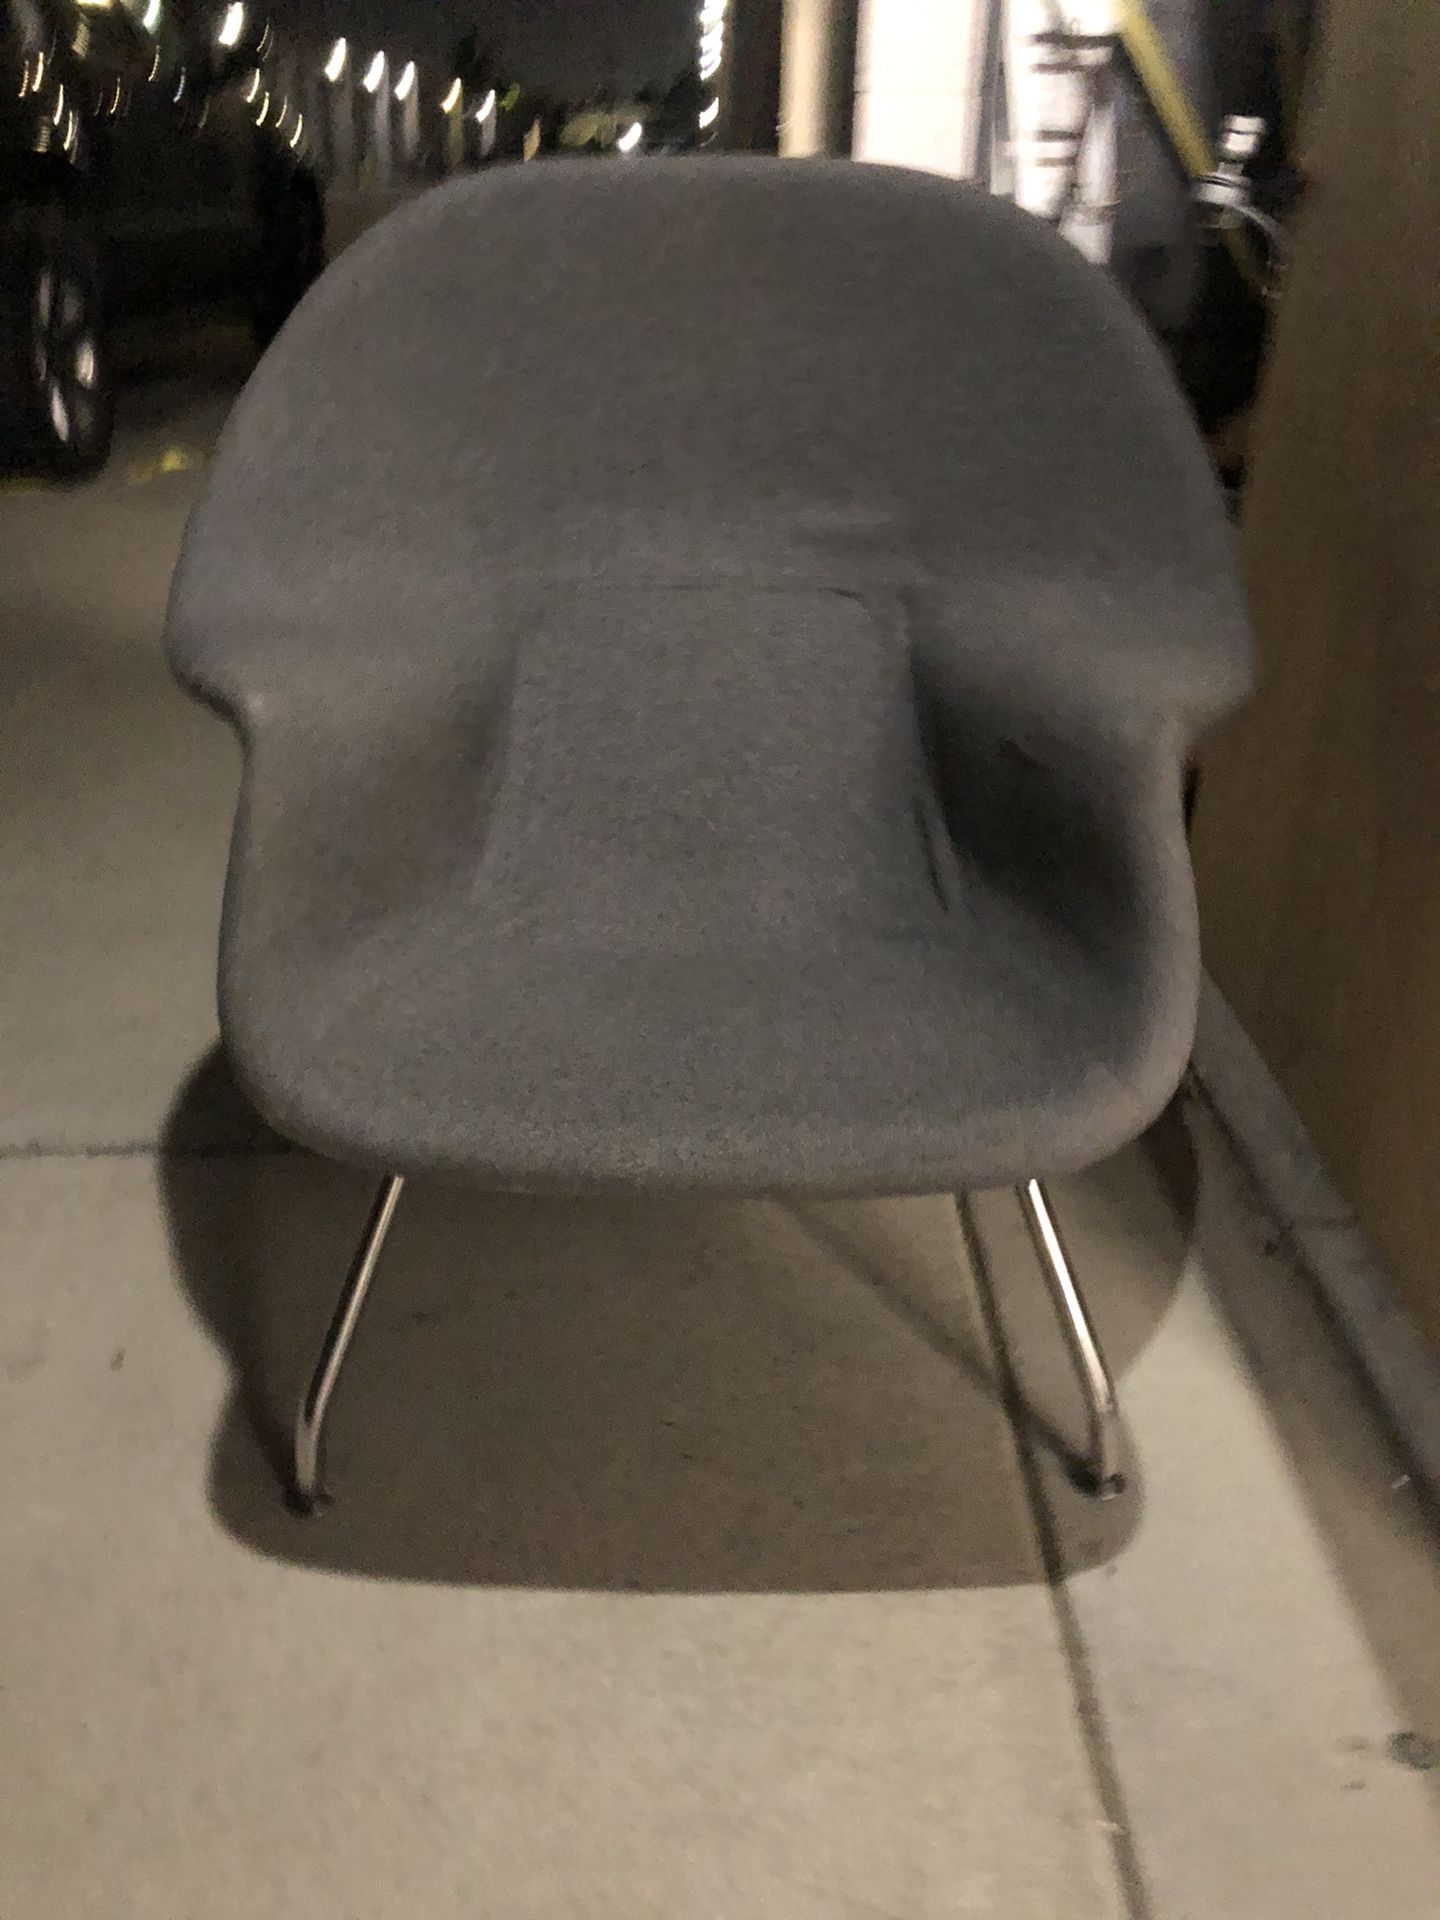 Midcentury style lounge chair $50!